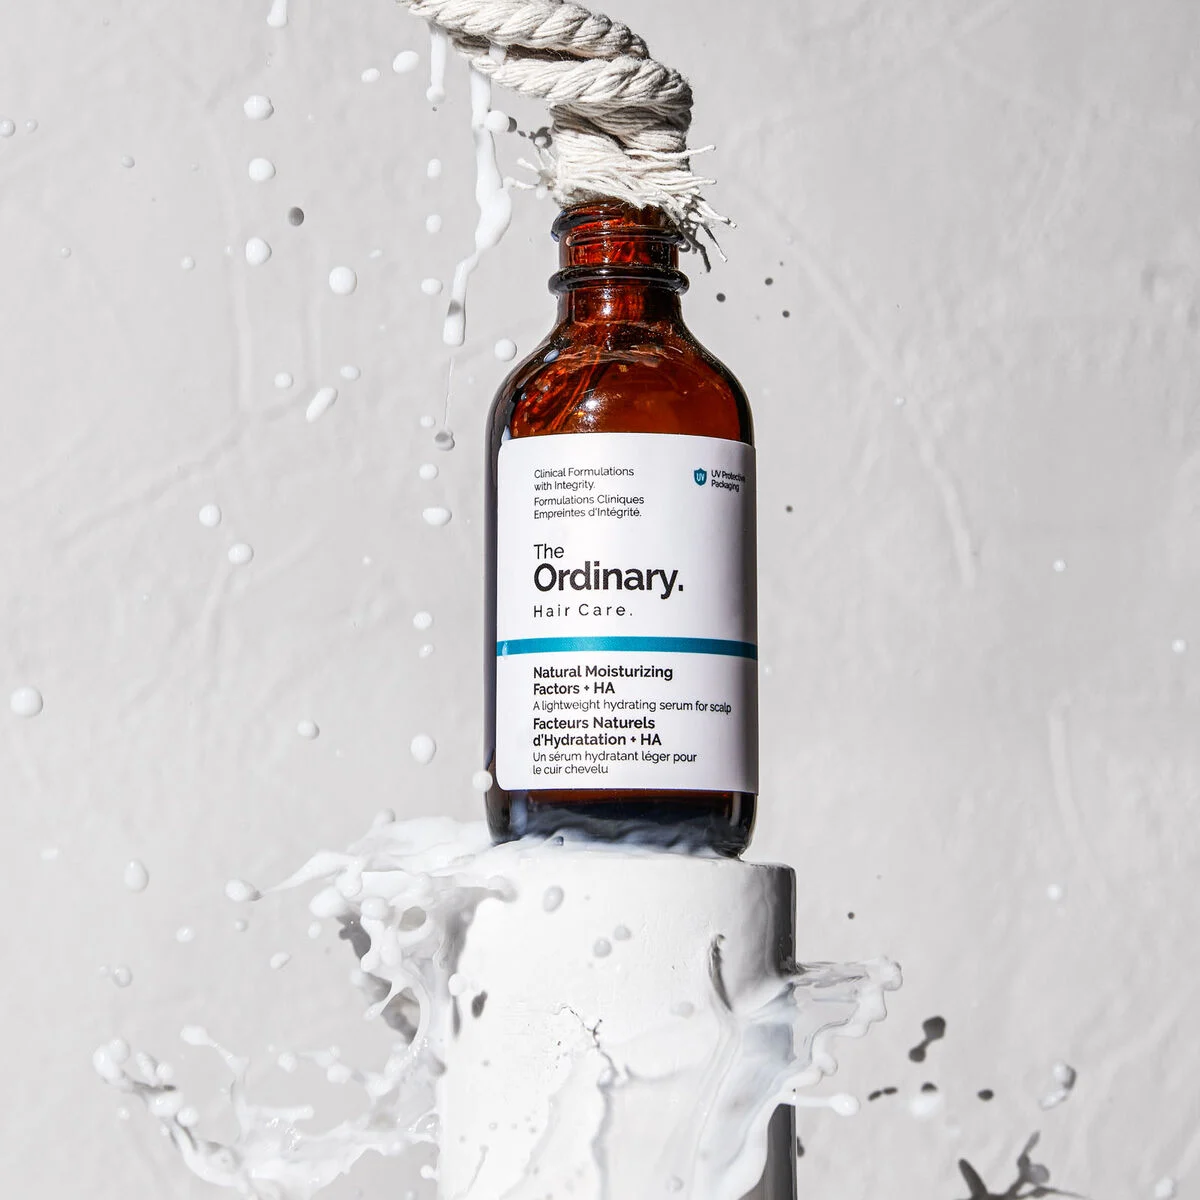 The ordinary natural. Сыворотка the ordinary natural Moisturizing Factors + ha).. The ordinary natural Moisturizing Factors ha. The ordinary the ordinary natural Moisturizing Factors + ha. The ordinary natural Moisturizing отзывы.